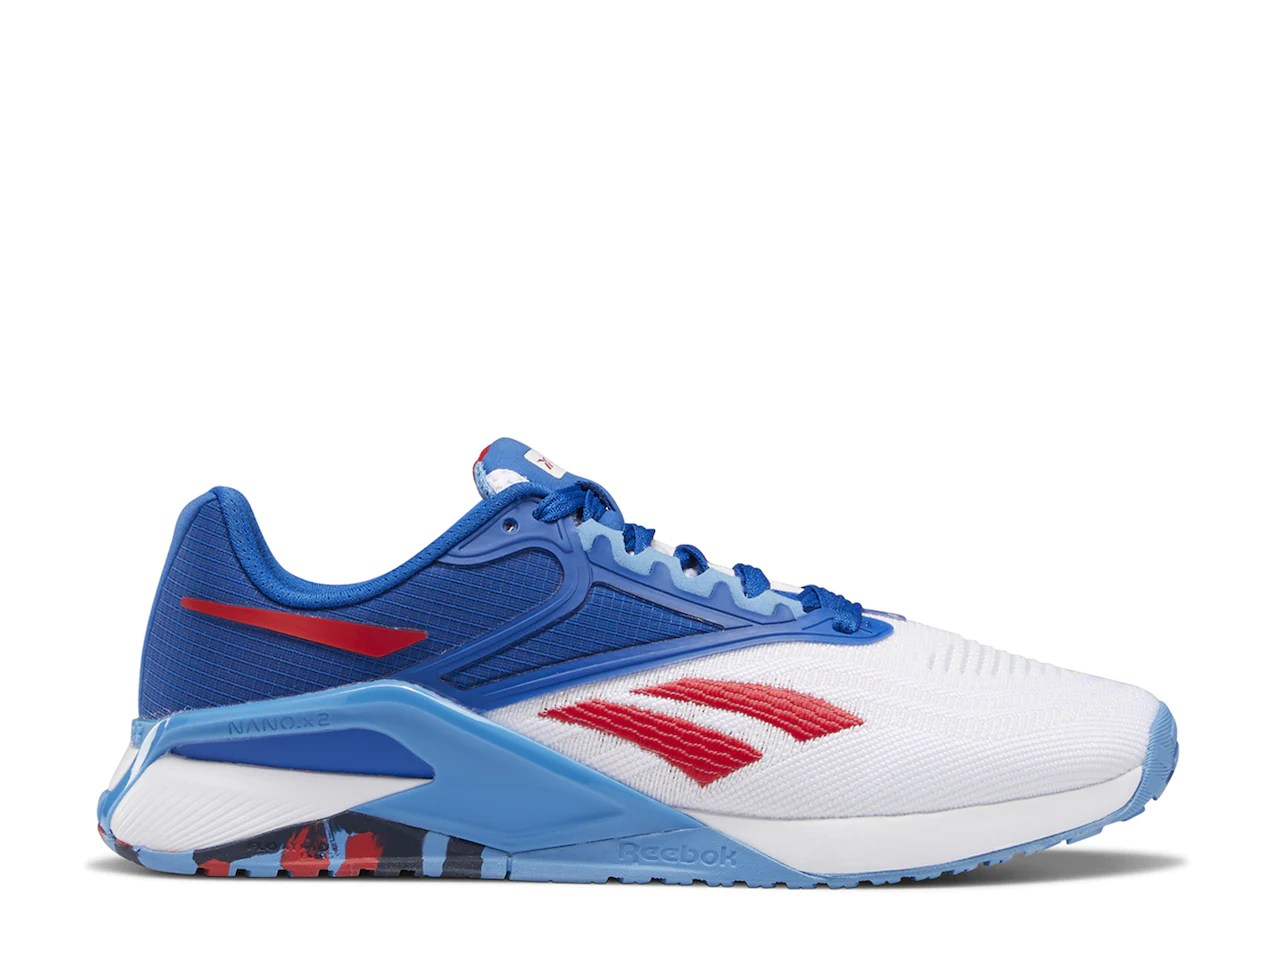 red white and blue reebok nano x2 rowing shoes